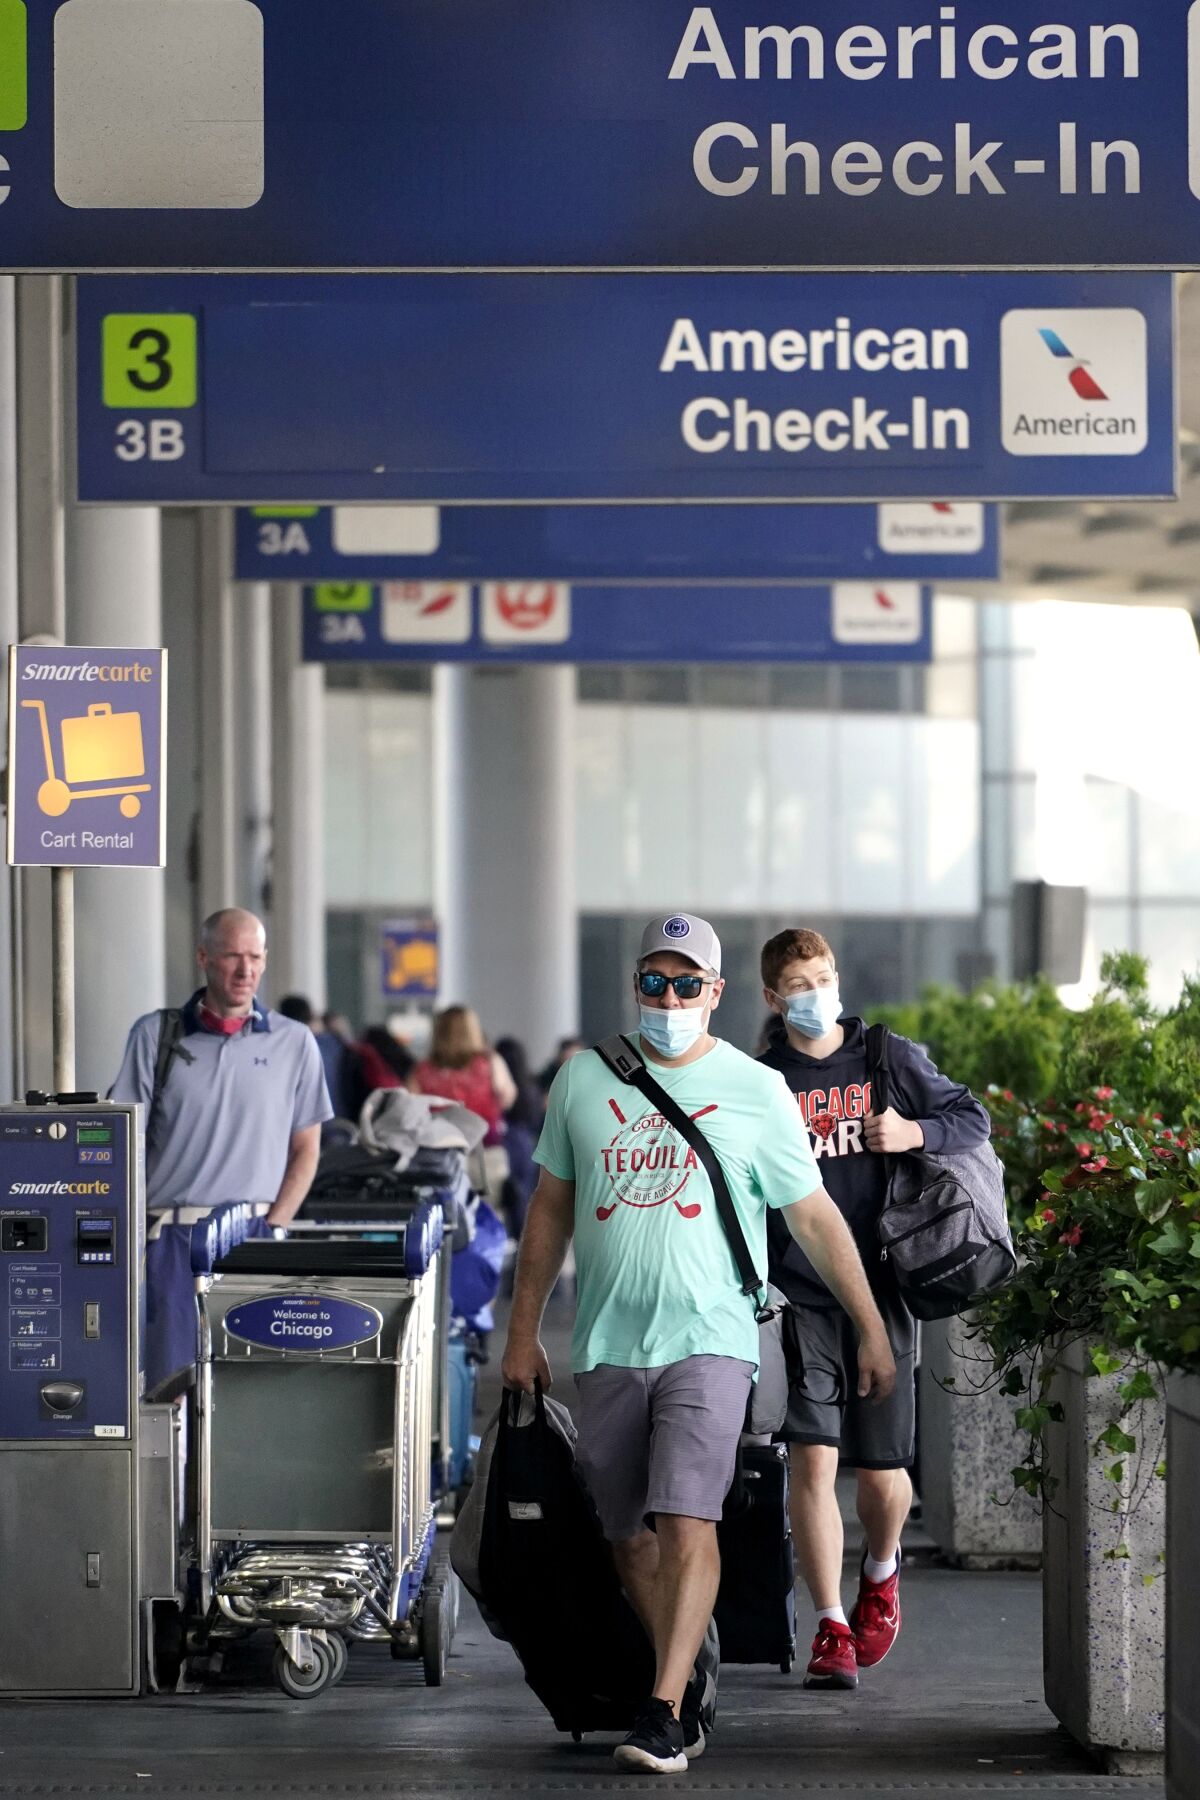 Travelers walk through Terminal 3 at Chicago's O'Hare International Airport ahead of the Fourth of July weekend, Friday, July 2, 2021. American Airlines says the July Fourth holiday weekend was a hit, with nearly three times as many people flying on the airline than did over the holiday weekend last year. (AP Photo/Nam Y. Huh)